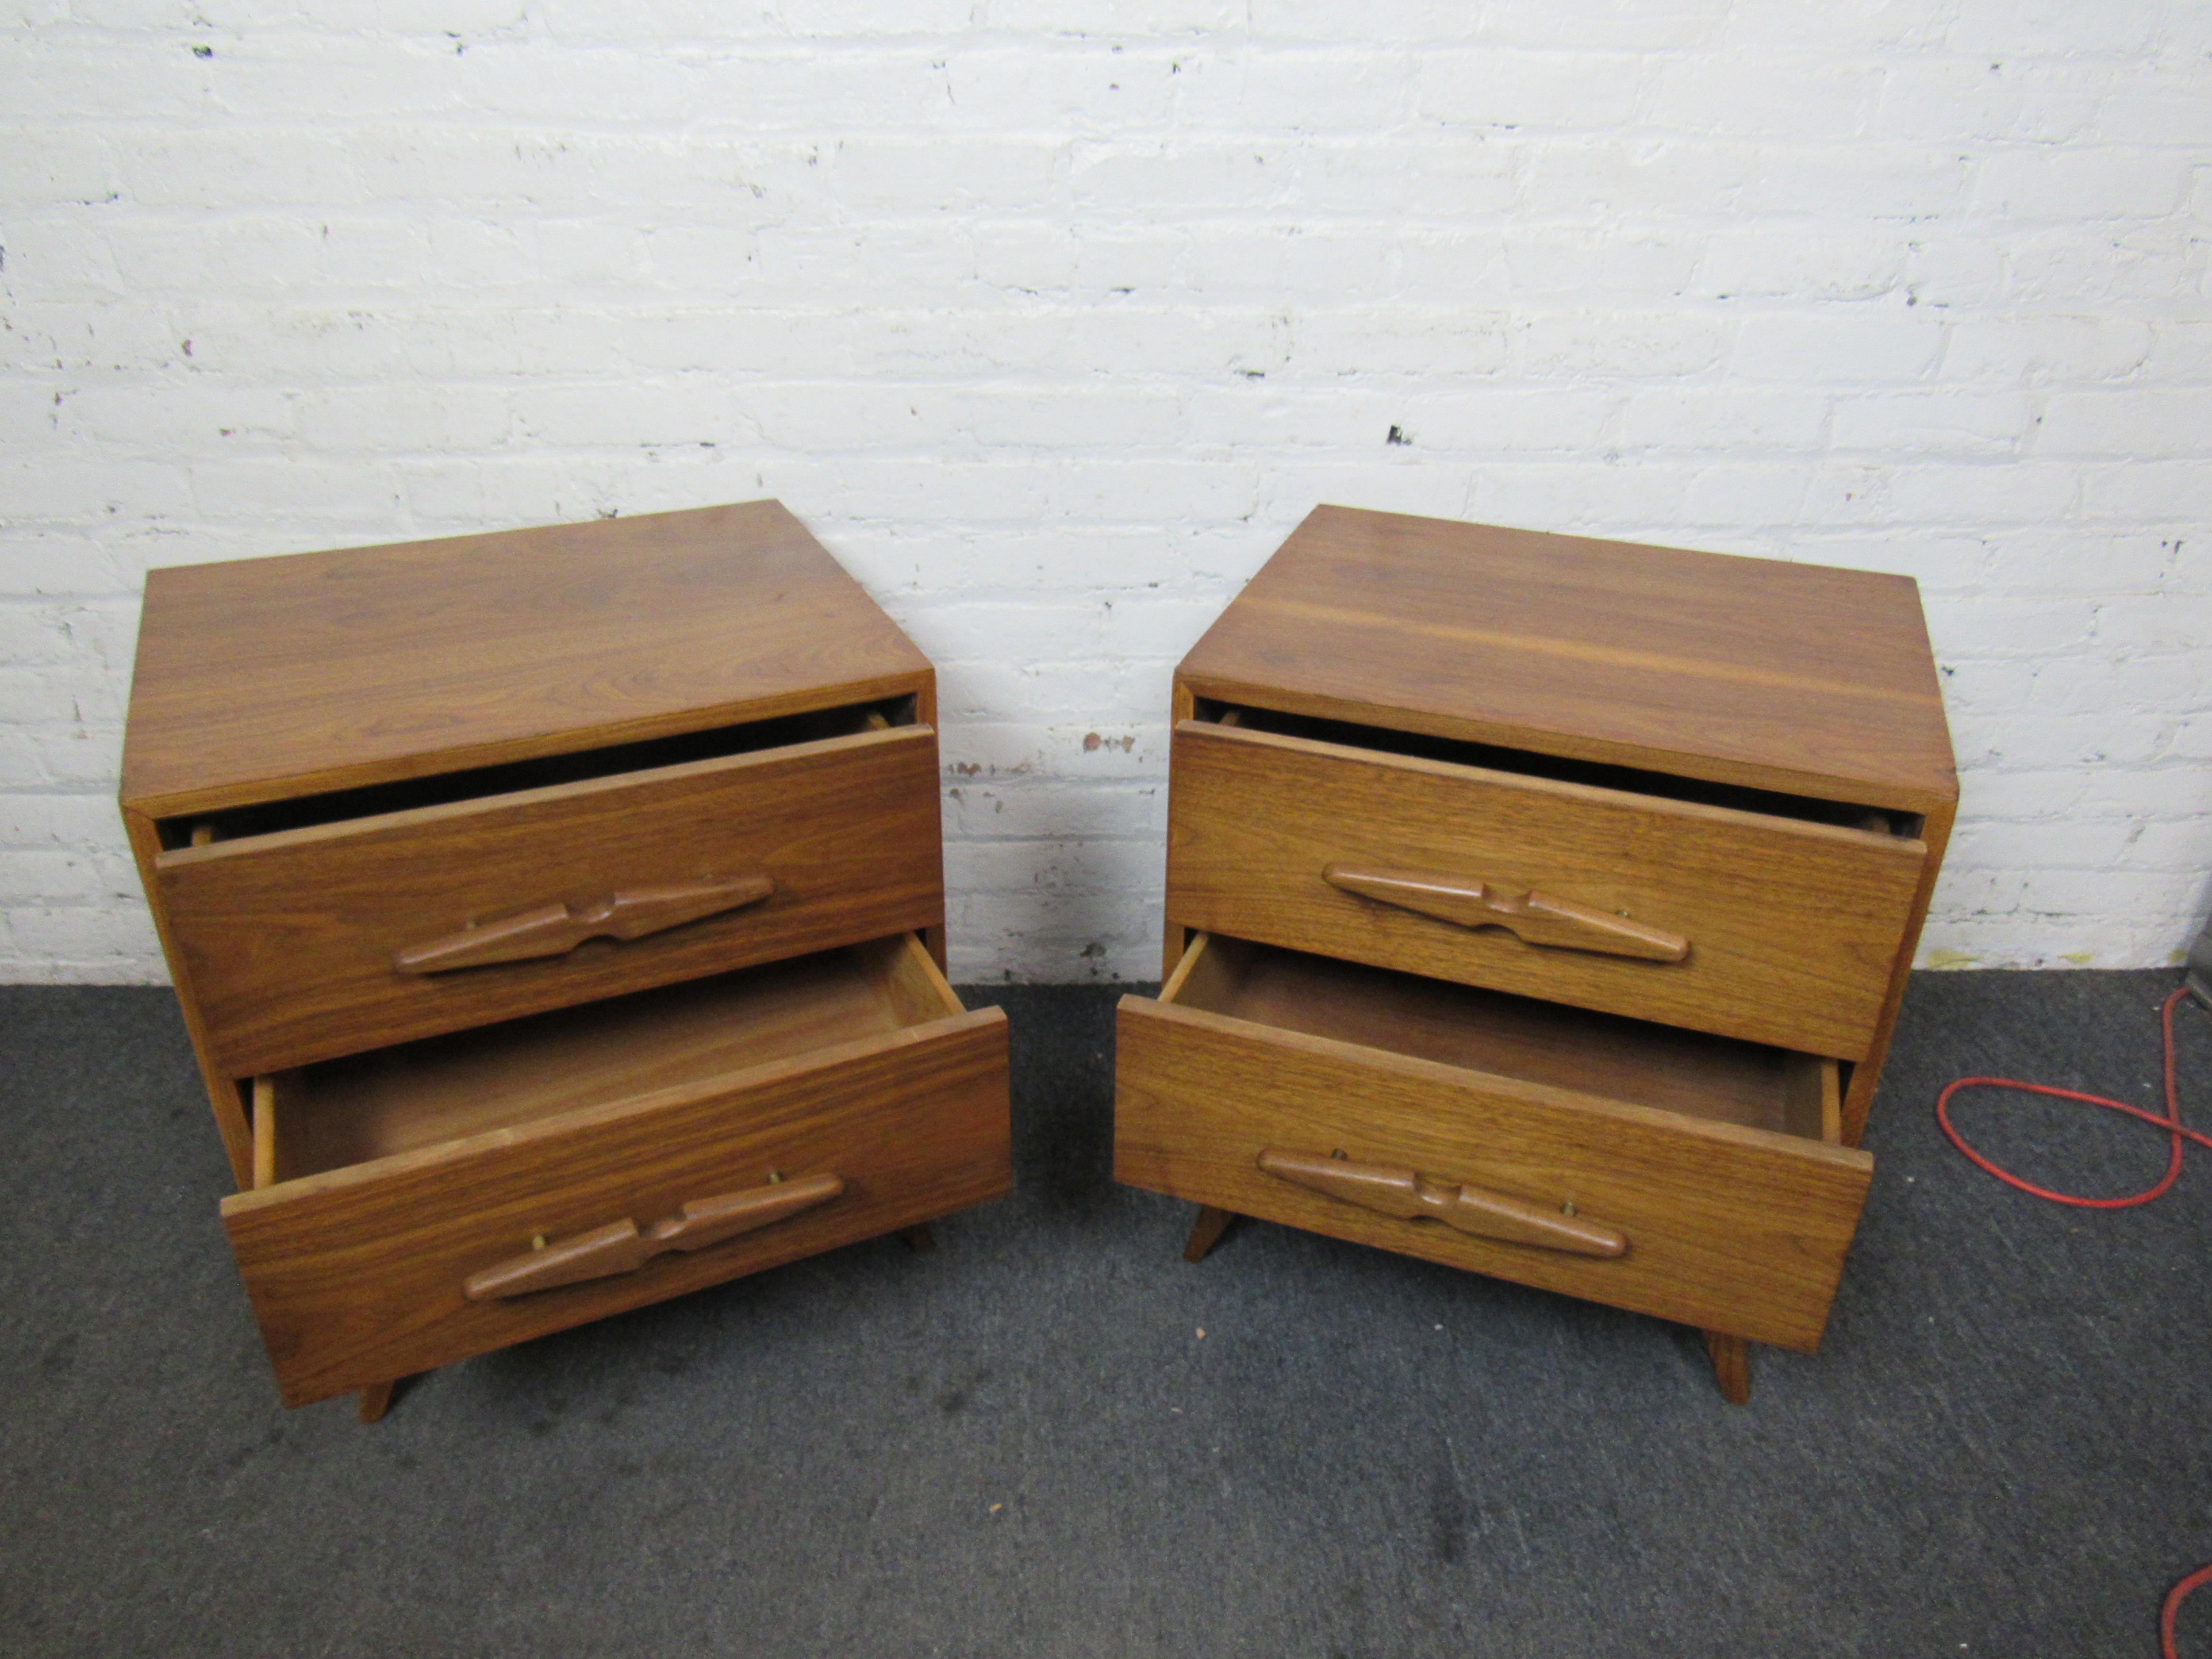 This pair of Mid-Century Modern nightstands combine beautiful walnut surfaces with sculpted drawer pulls and legs. Please confirm item location with seller (NY/NJ).